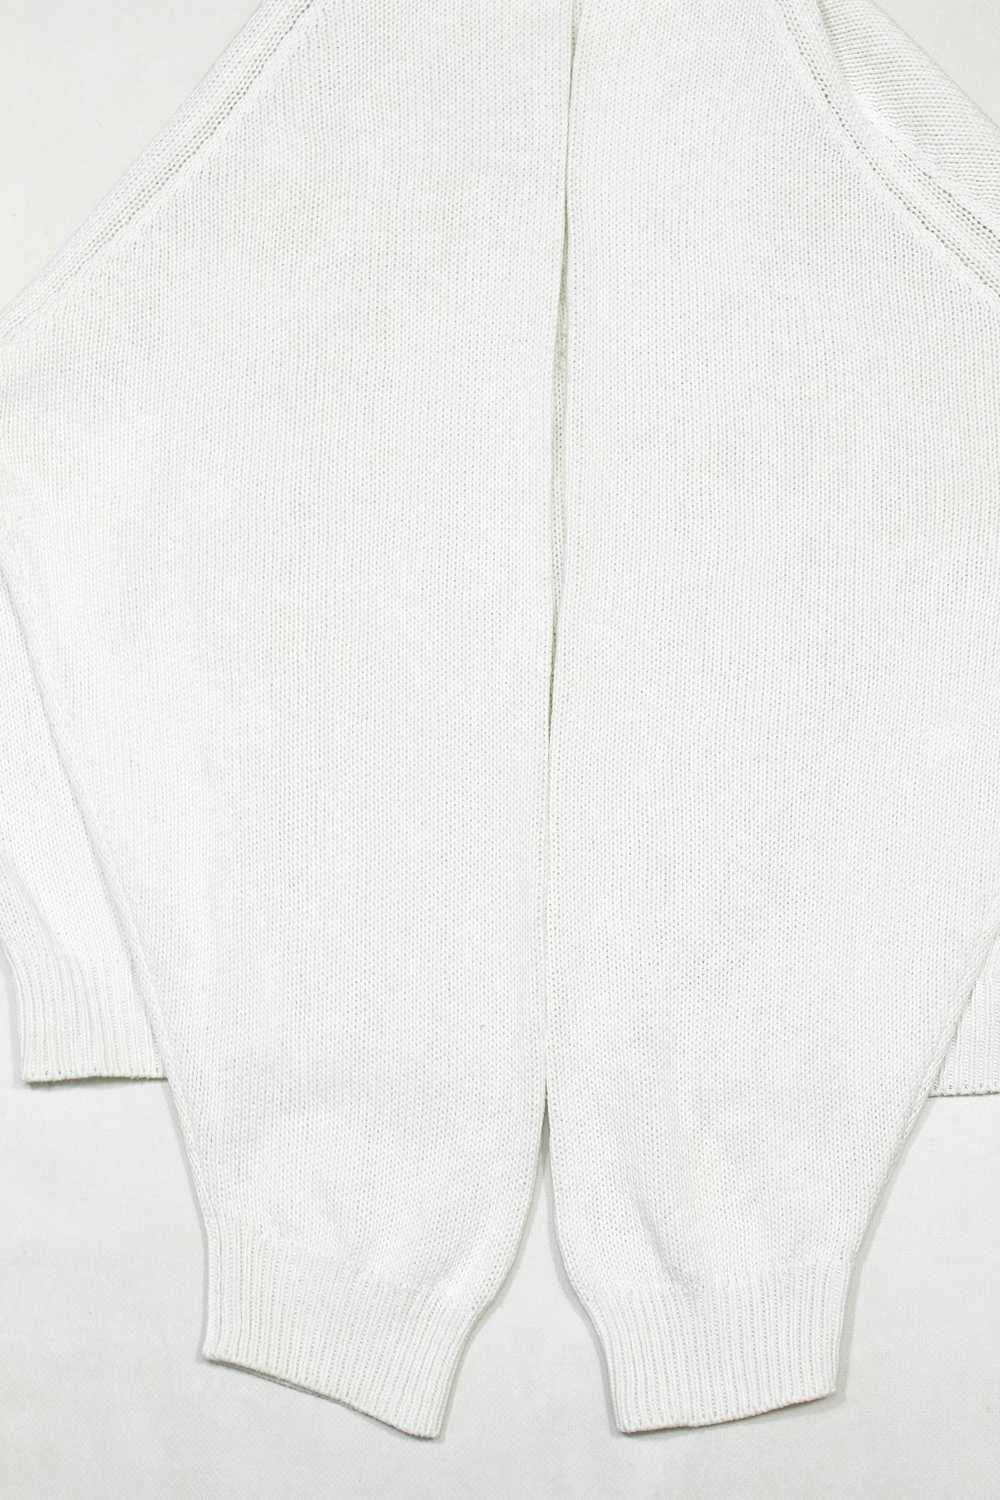 Lacoste 90S Big Logo Embroidered Sweater Vintage … - image 5